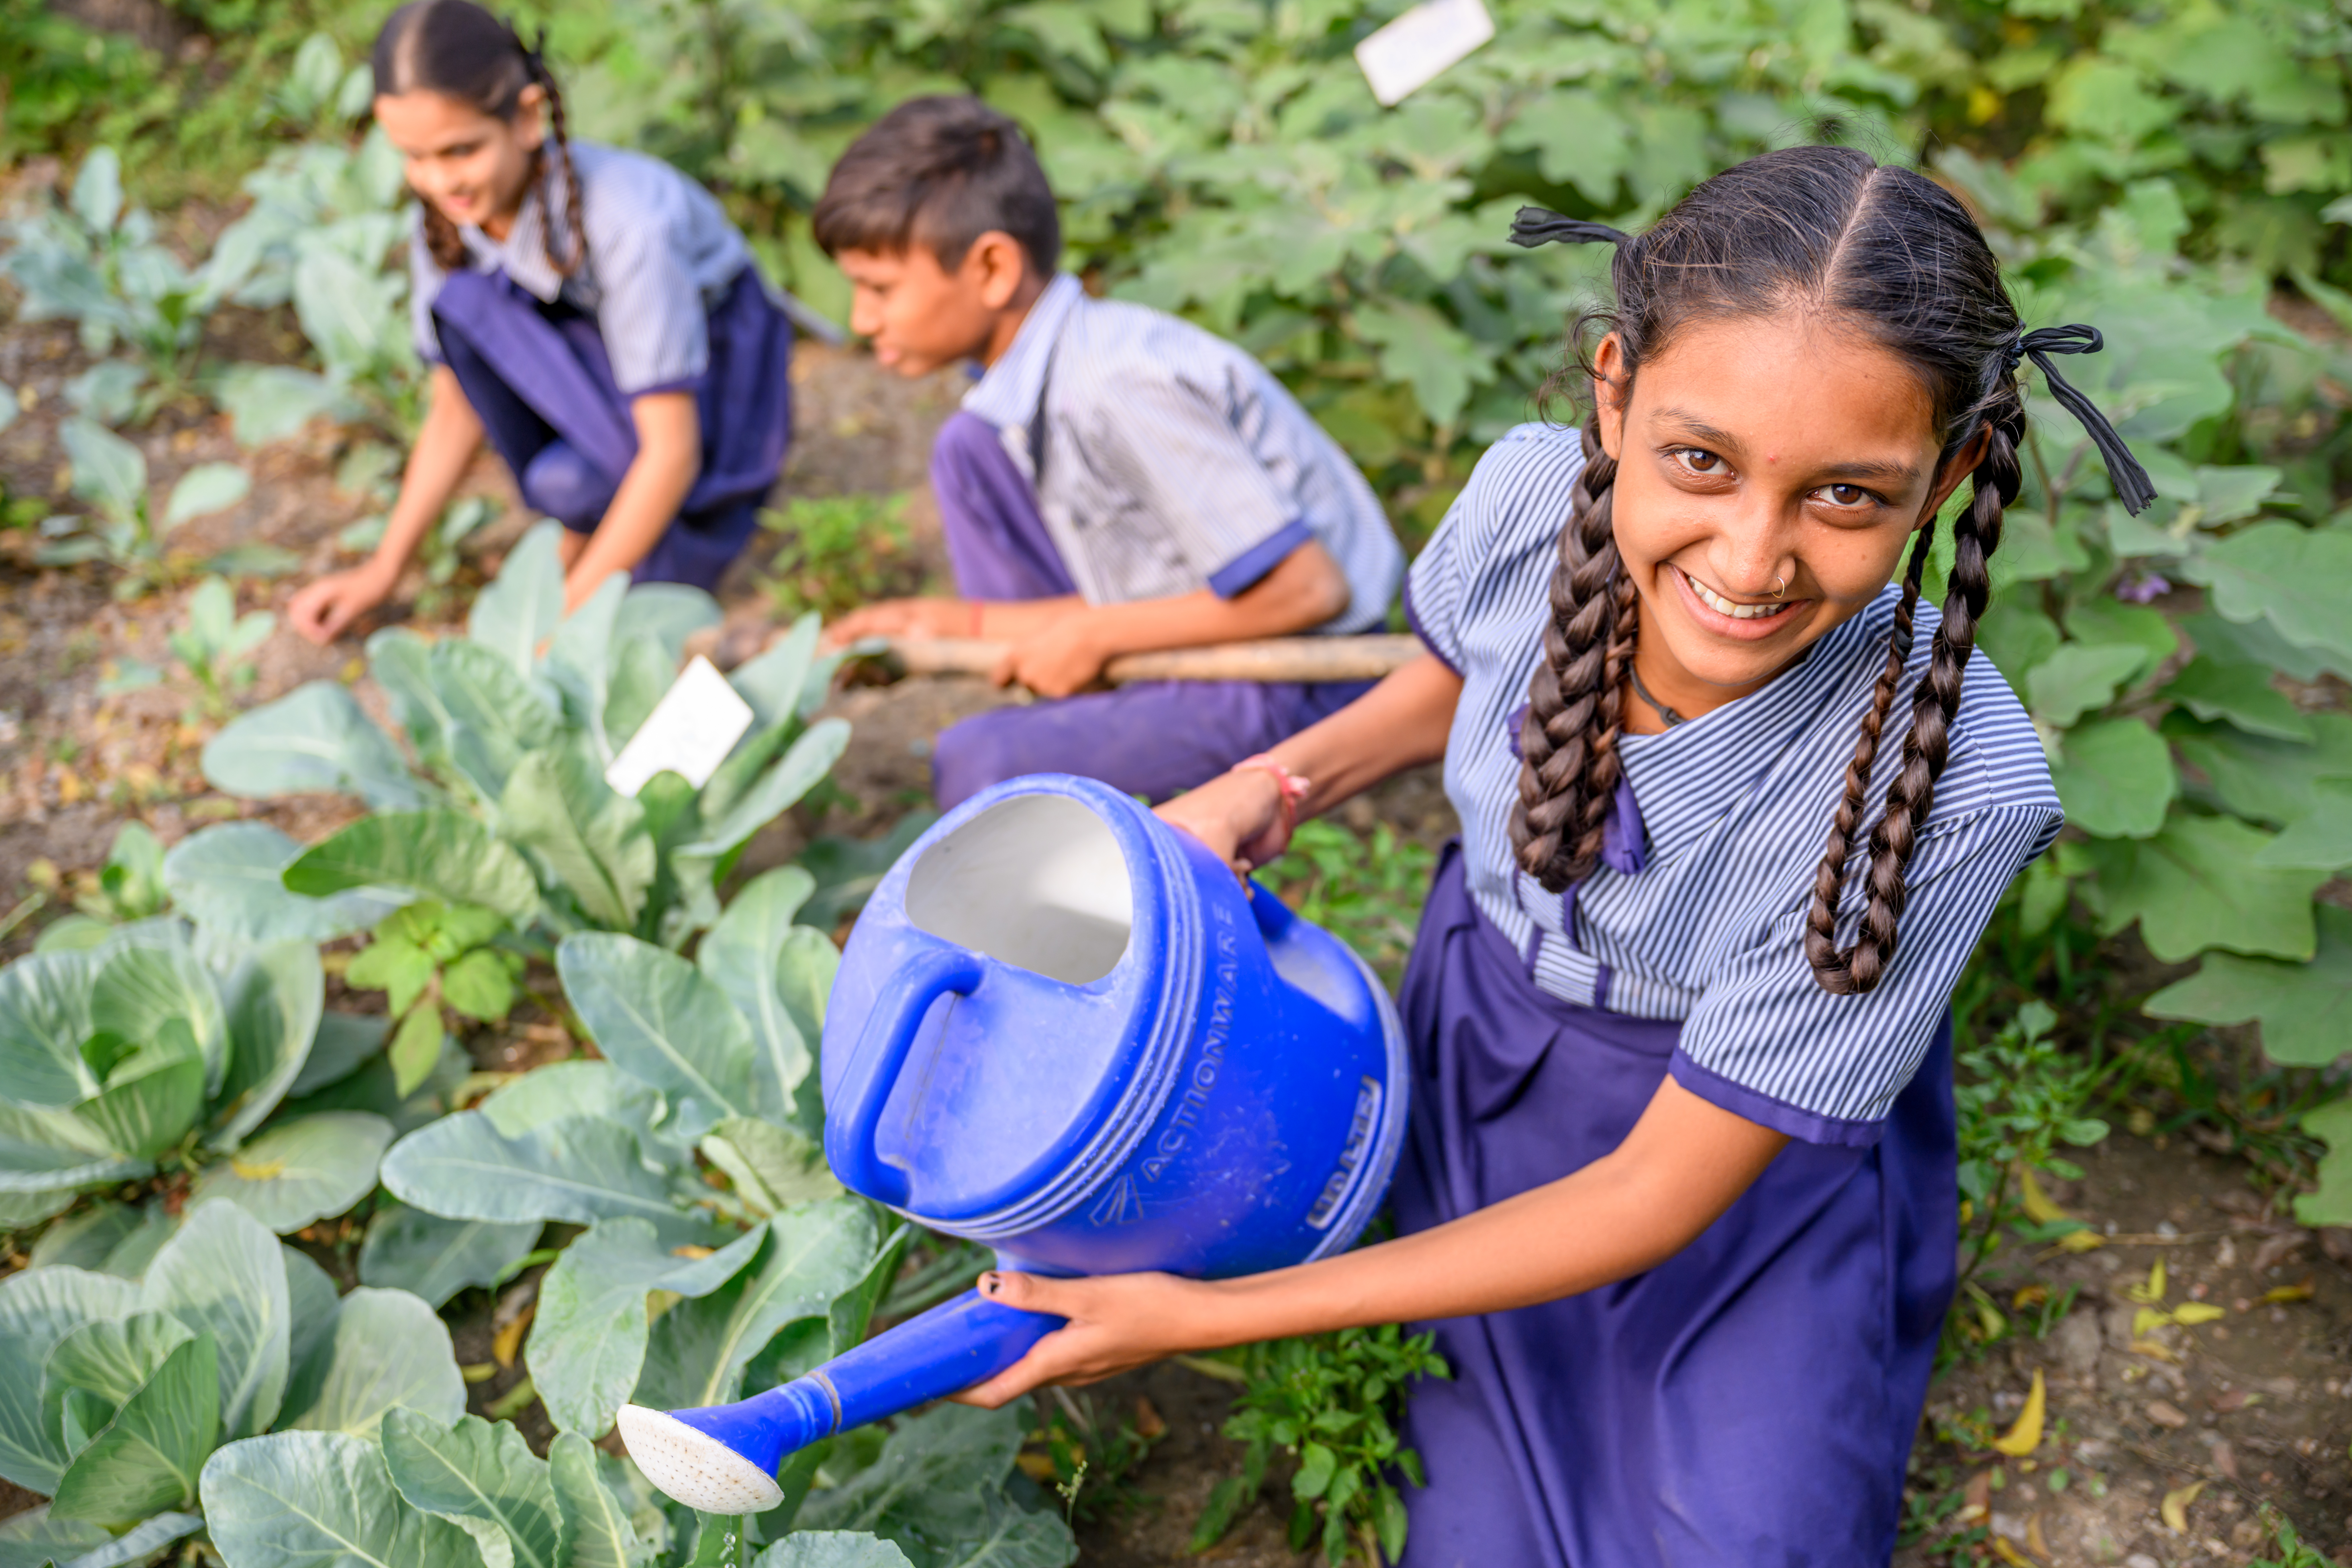 A smiling girl uses a watering can to water plants.